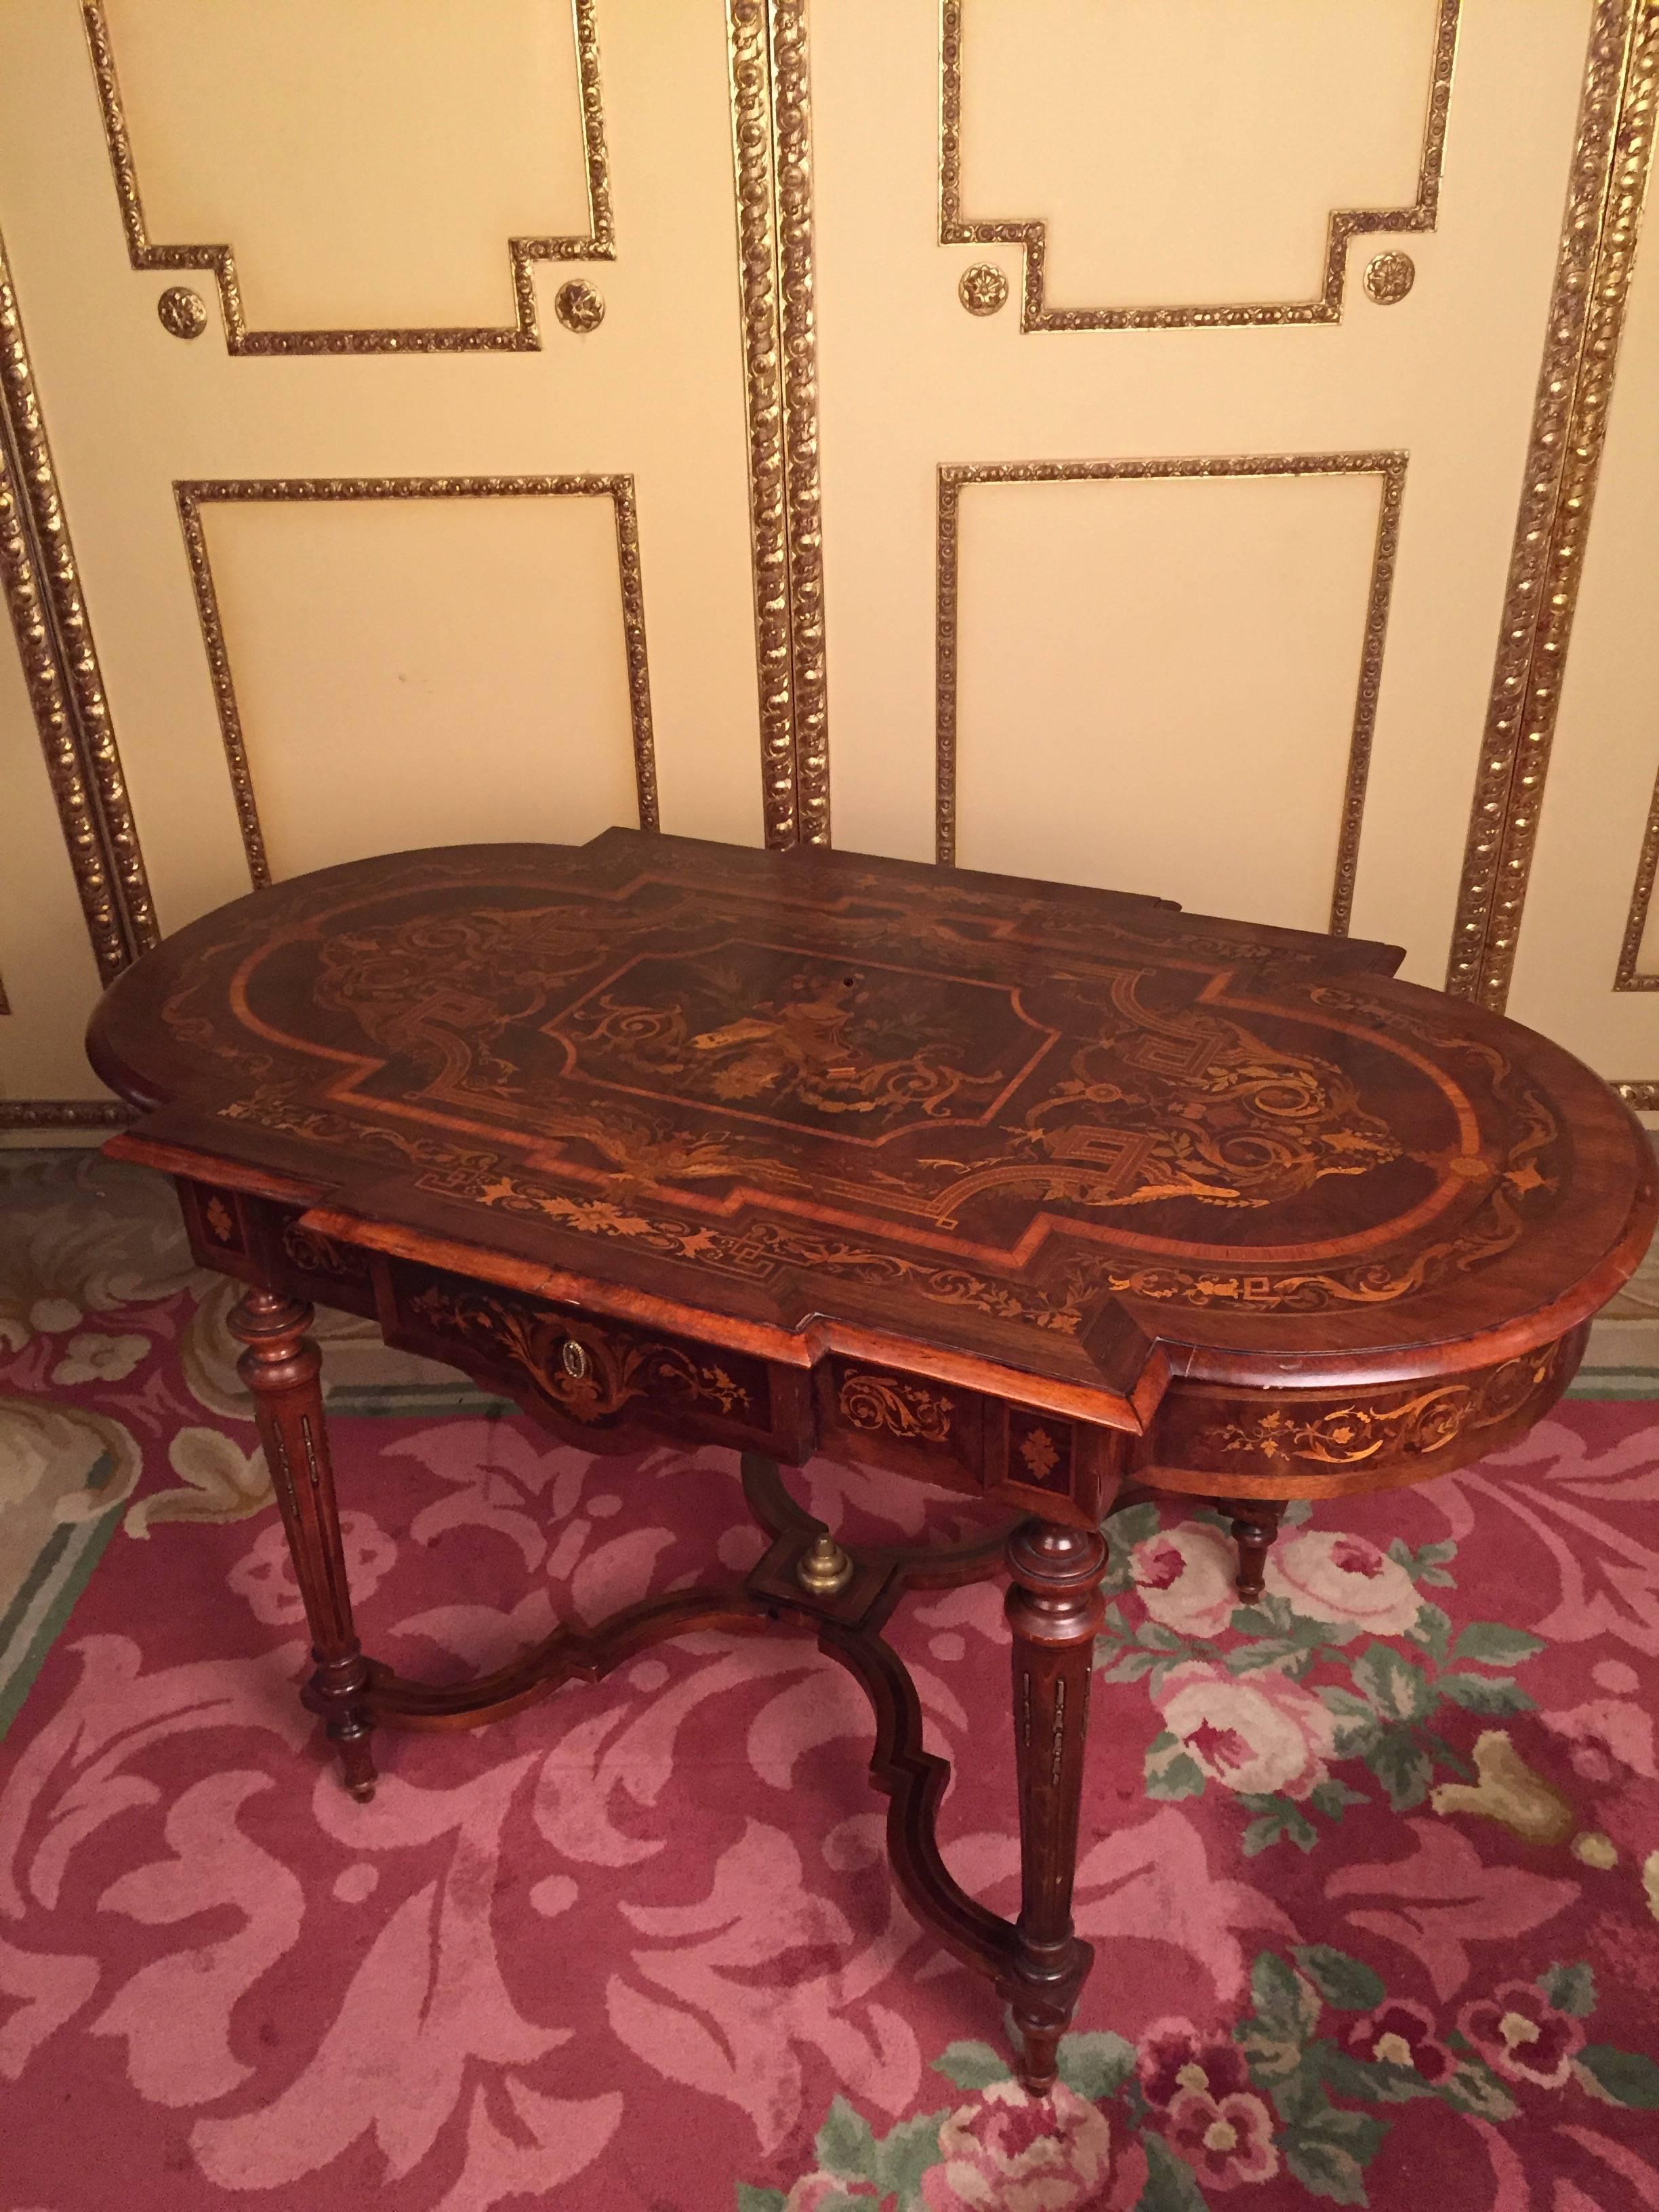 Rectangular with semi-circular sides.
The body stands on conical legs, which are connected to a cross-bridge. Tabletop strongly inlaid with tendrils and foliage.

A drawer with key.
Marketerie with precious wood:
Mahogany and tulip


(A-134)